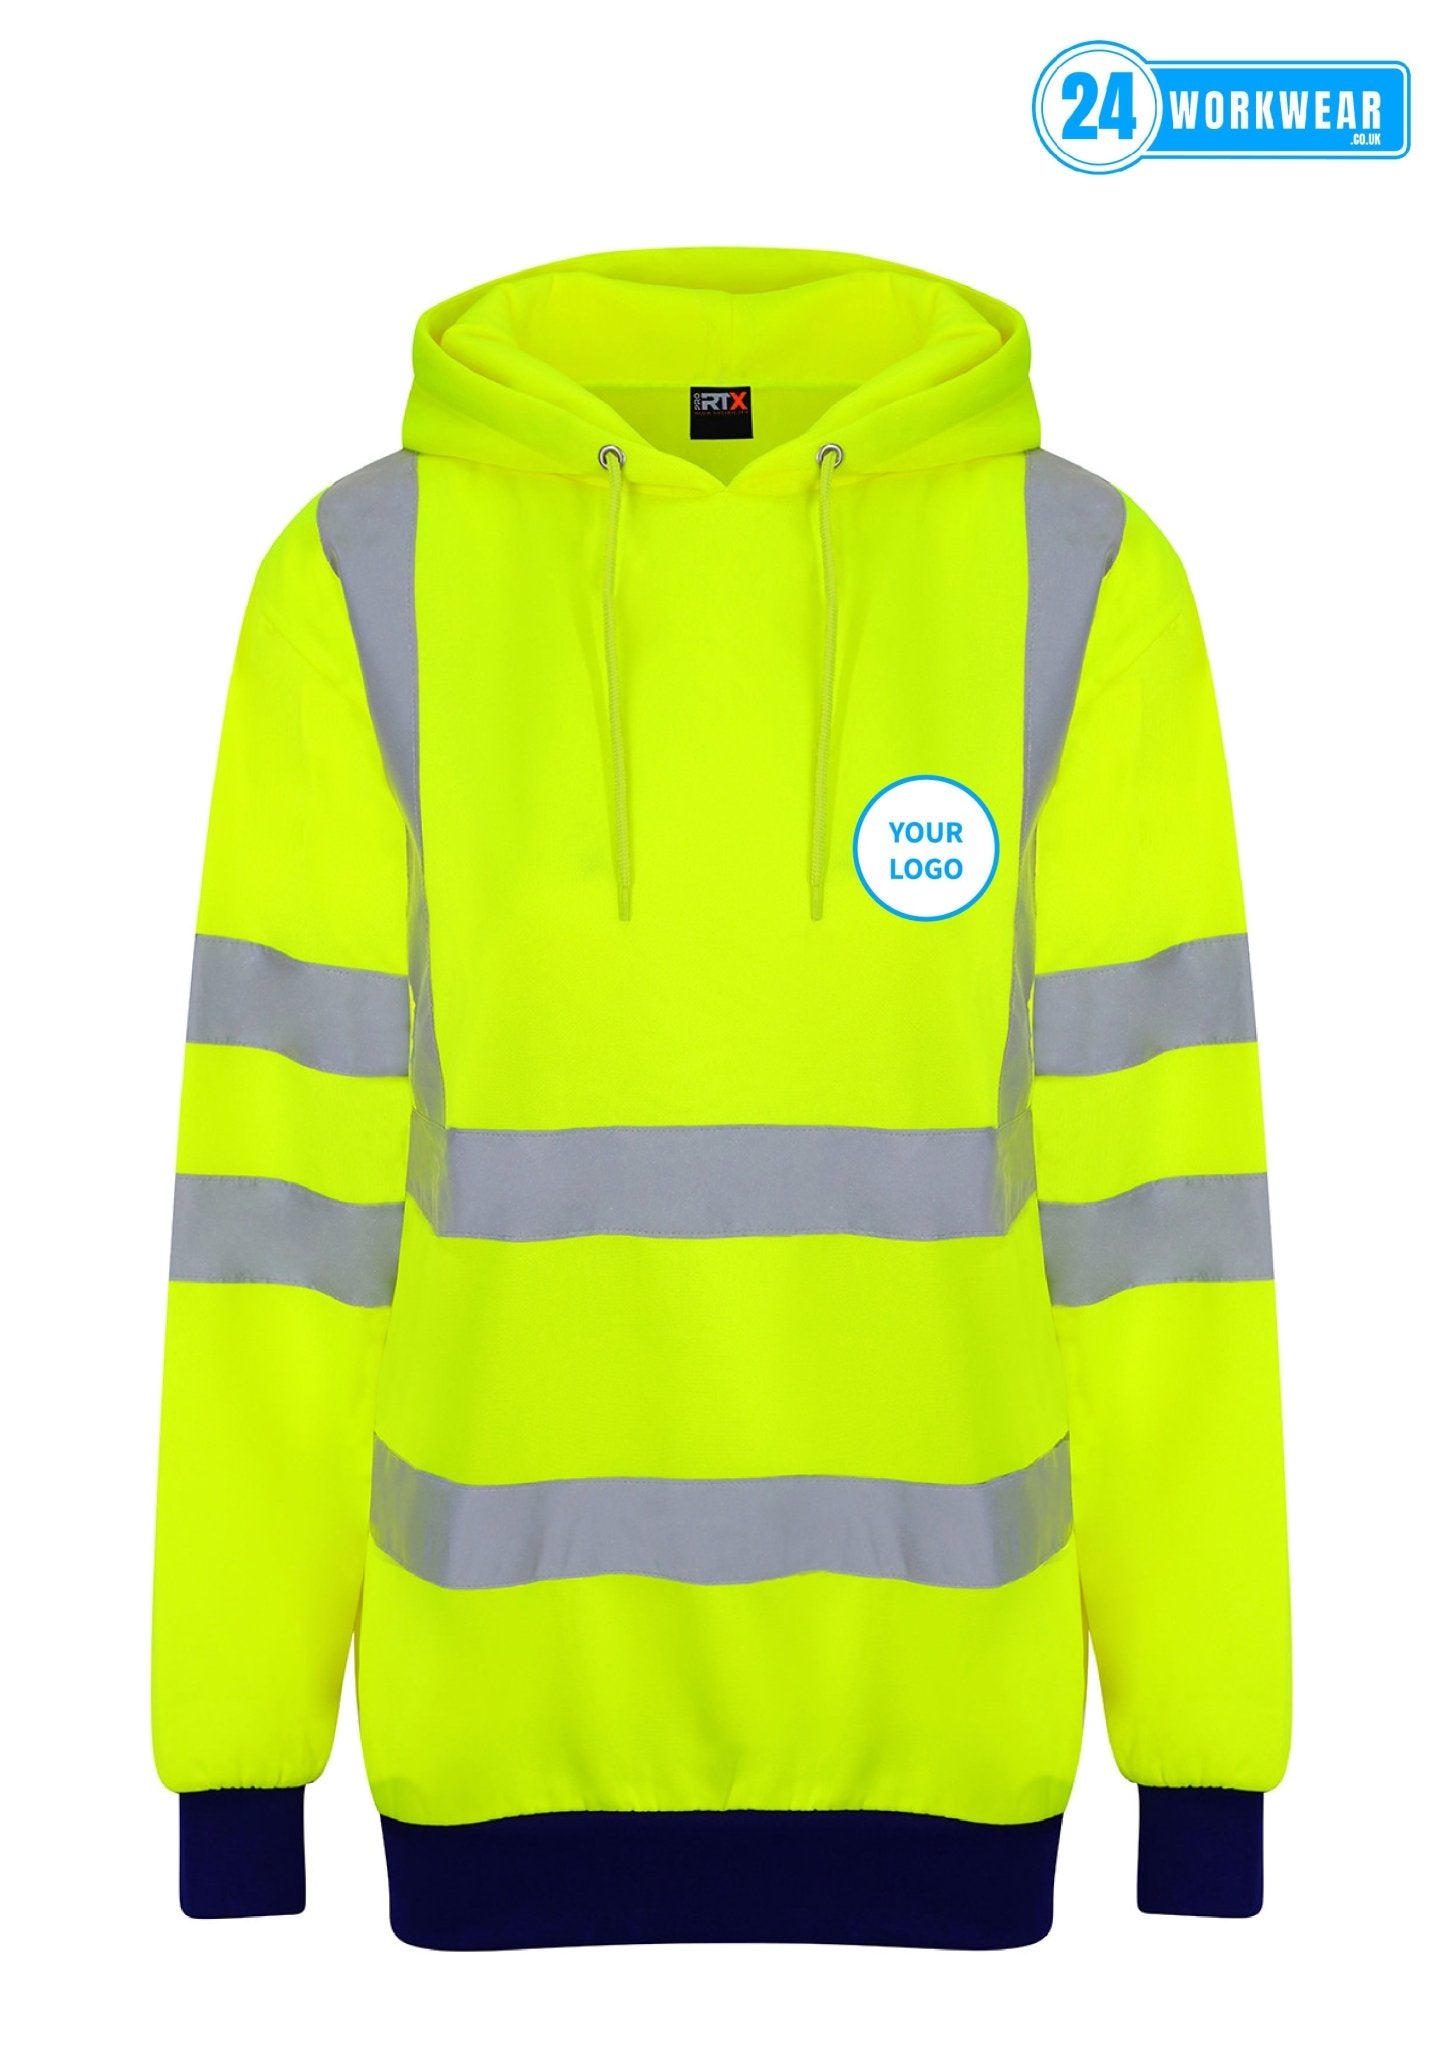 Pro RTX High Visibility Hoodie - 24 Workwear - Hoodie